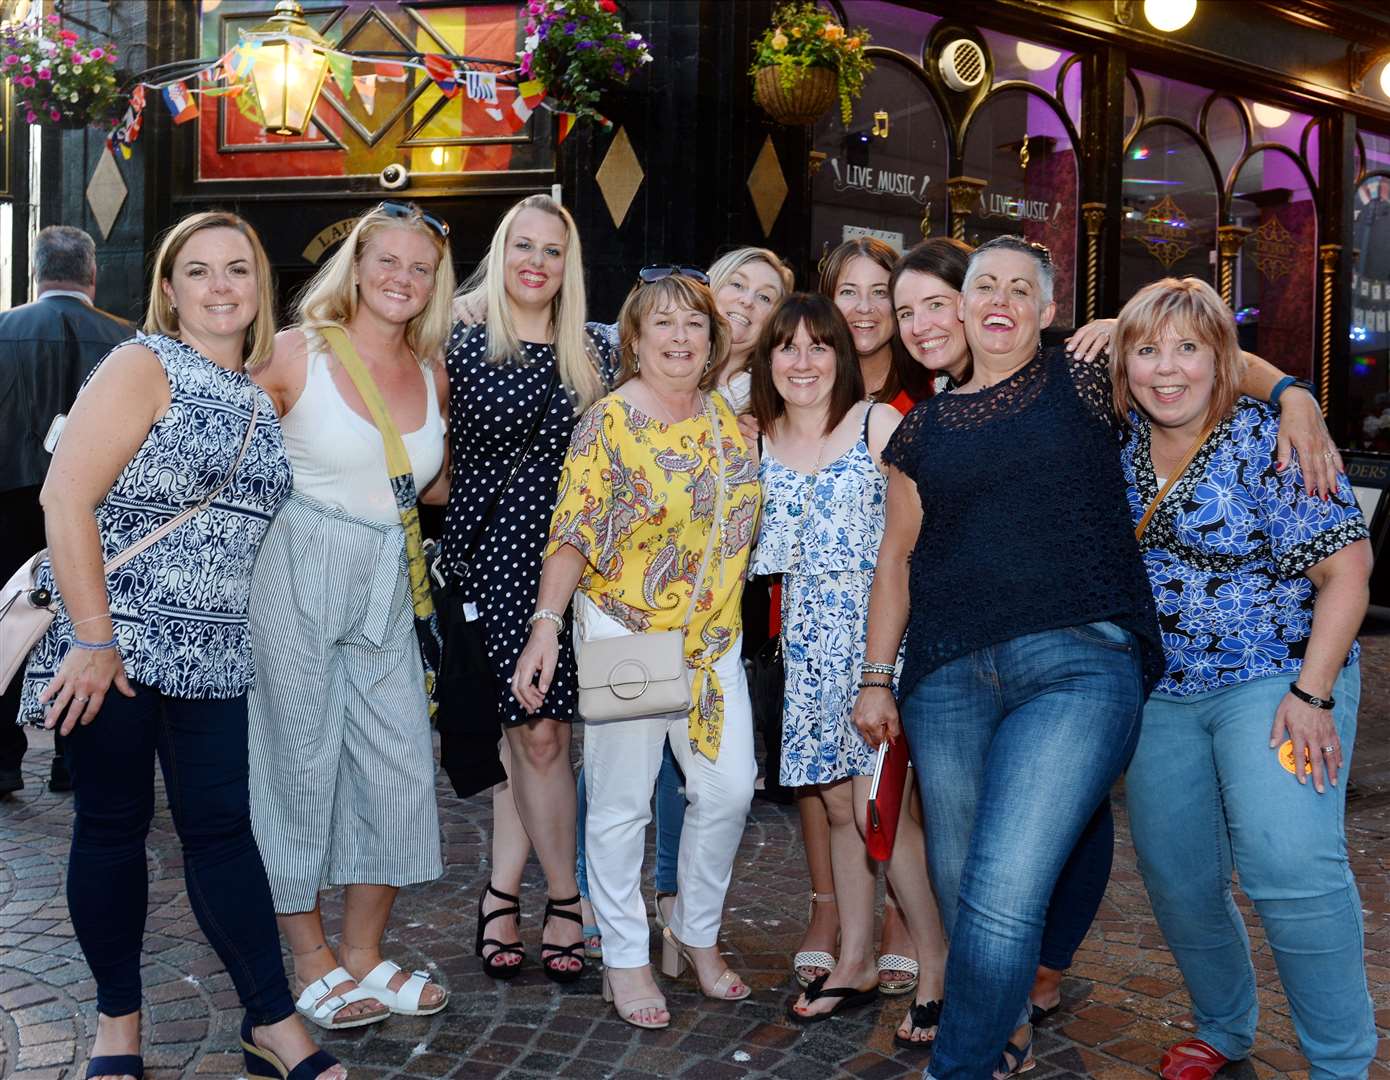 The staff of Ward 5C at Raigmore enjoyed a night out. Picture: Gary Anthony.